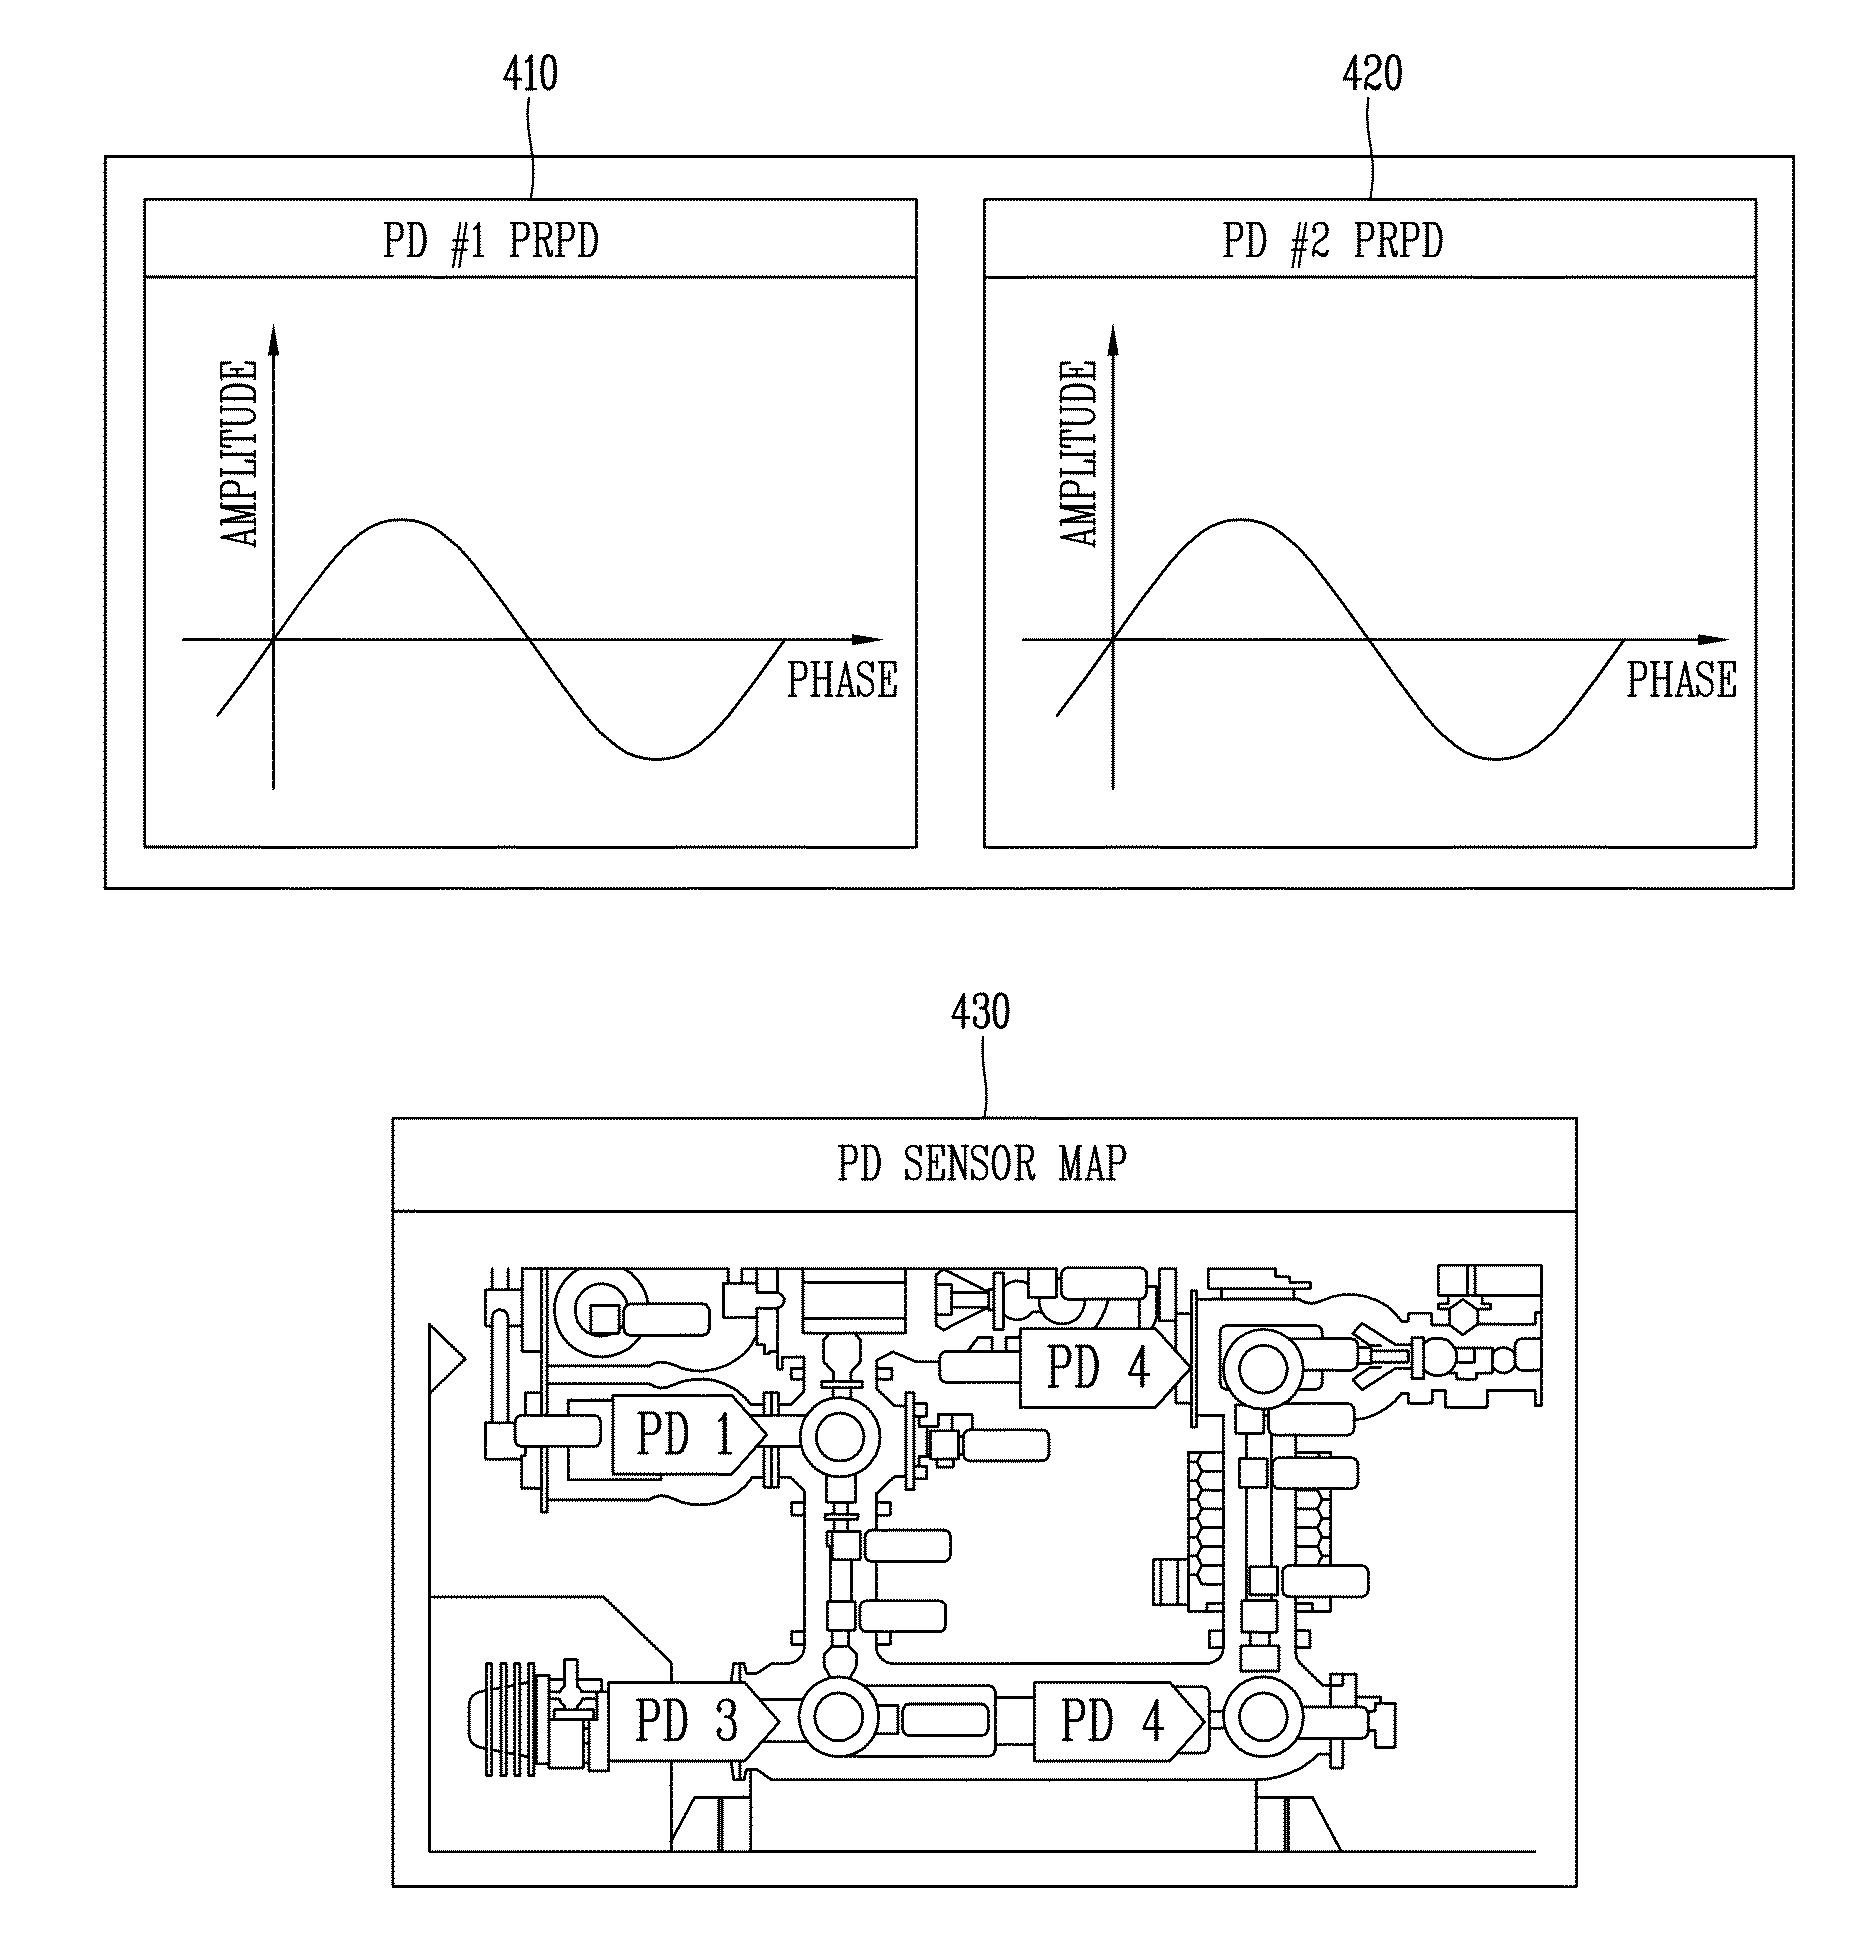 System for analysis of partial discharge defects of gas insulated switchgear